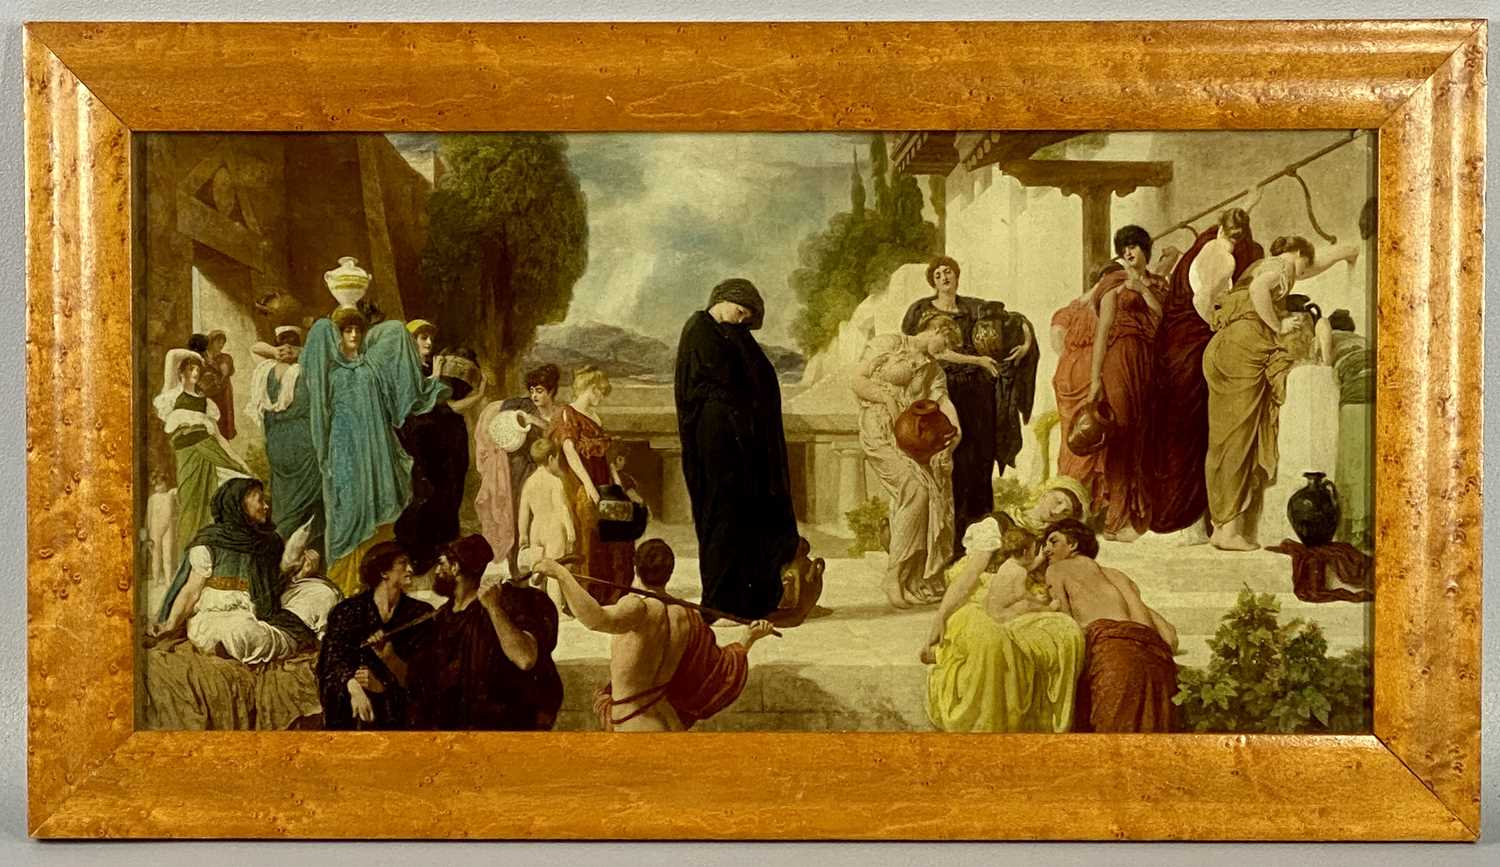 FREDERIC LORD LEIGHTON PRA reverse print on glass - 'Study for Captive Andromache', 26 x 54cms - Image 2 of 3